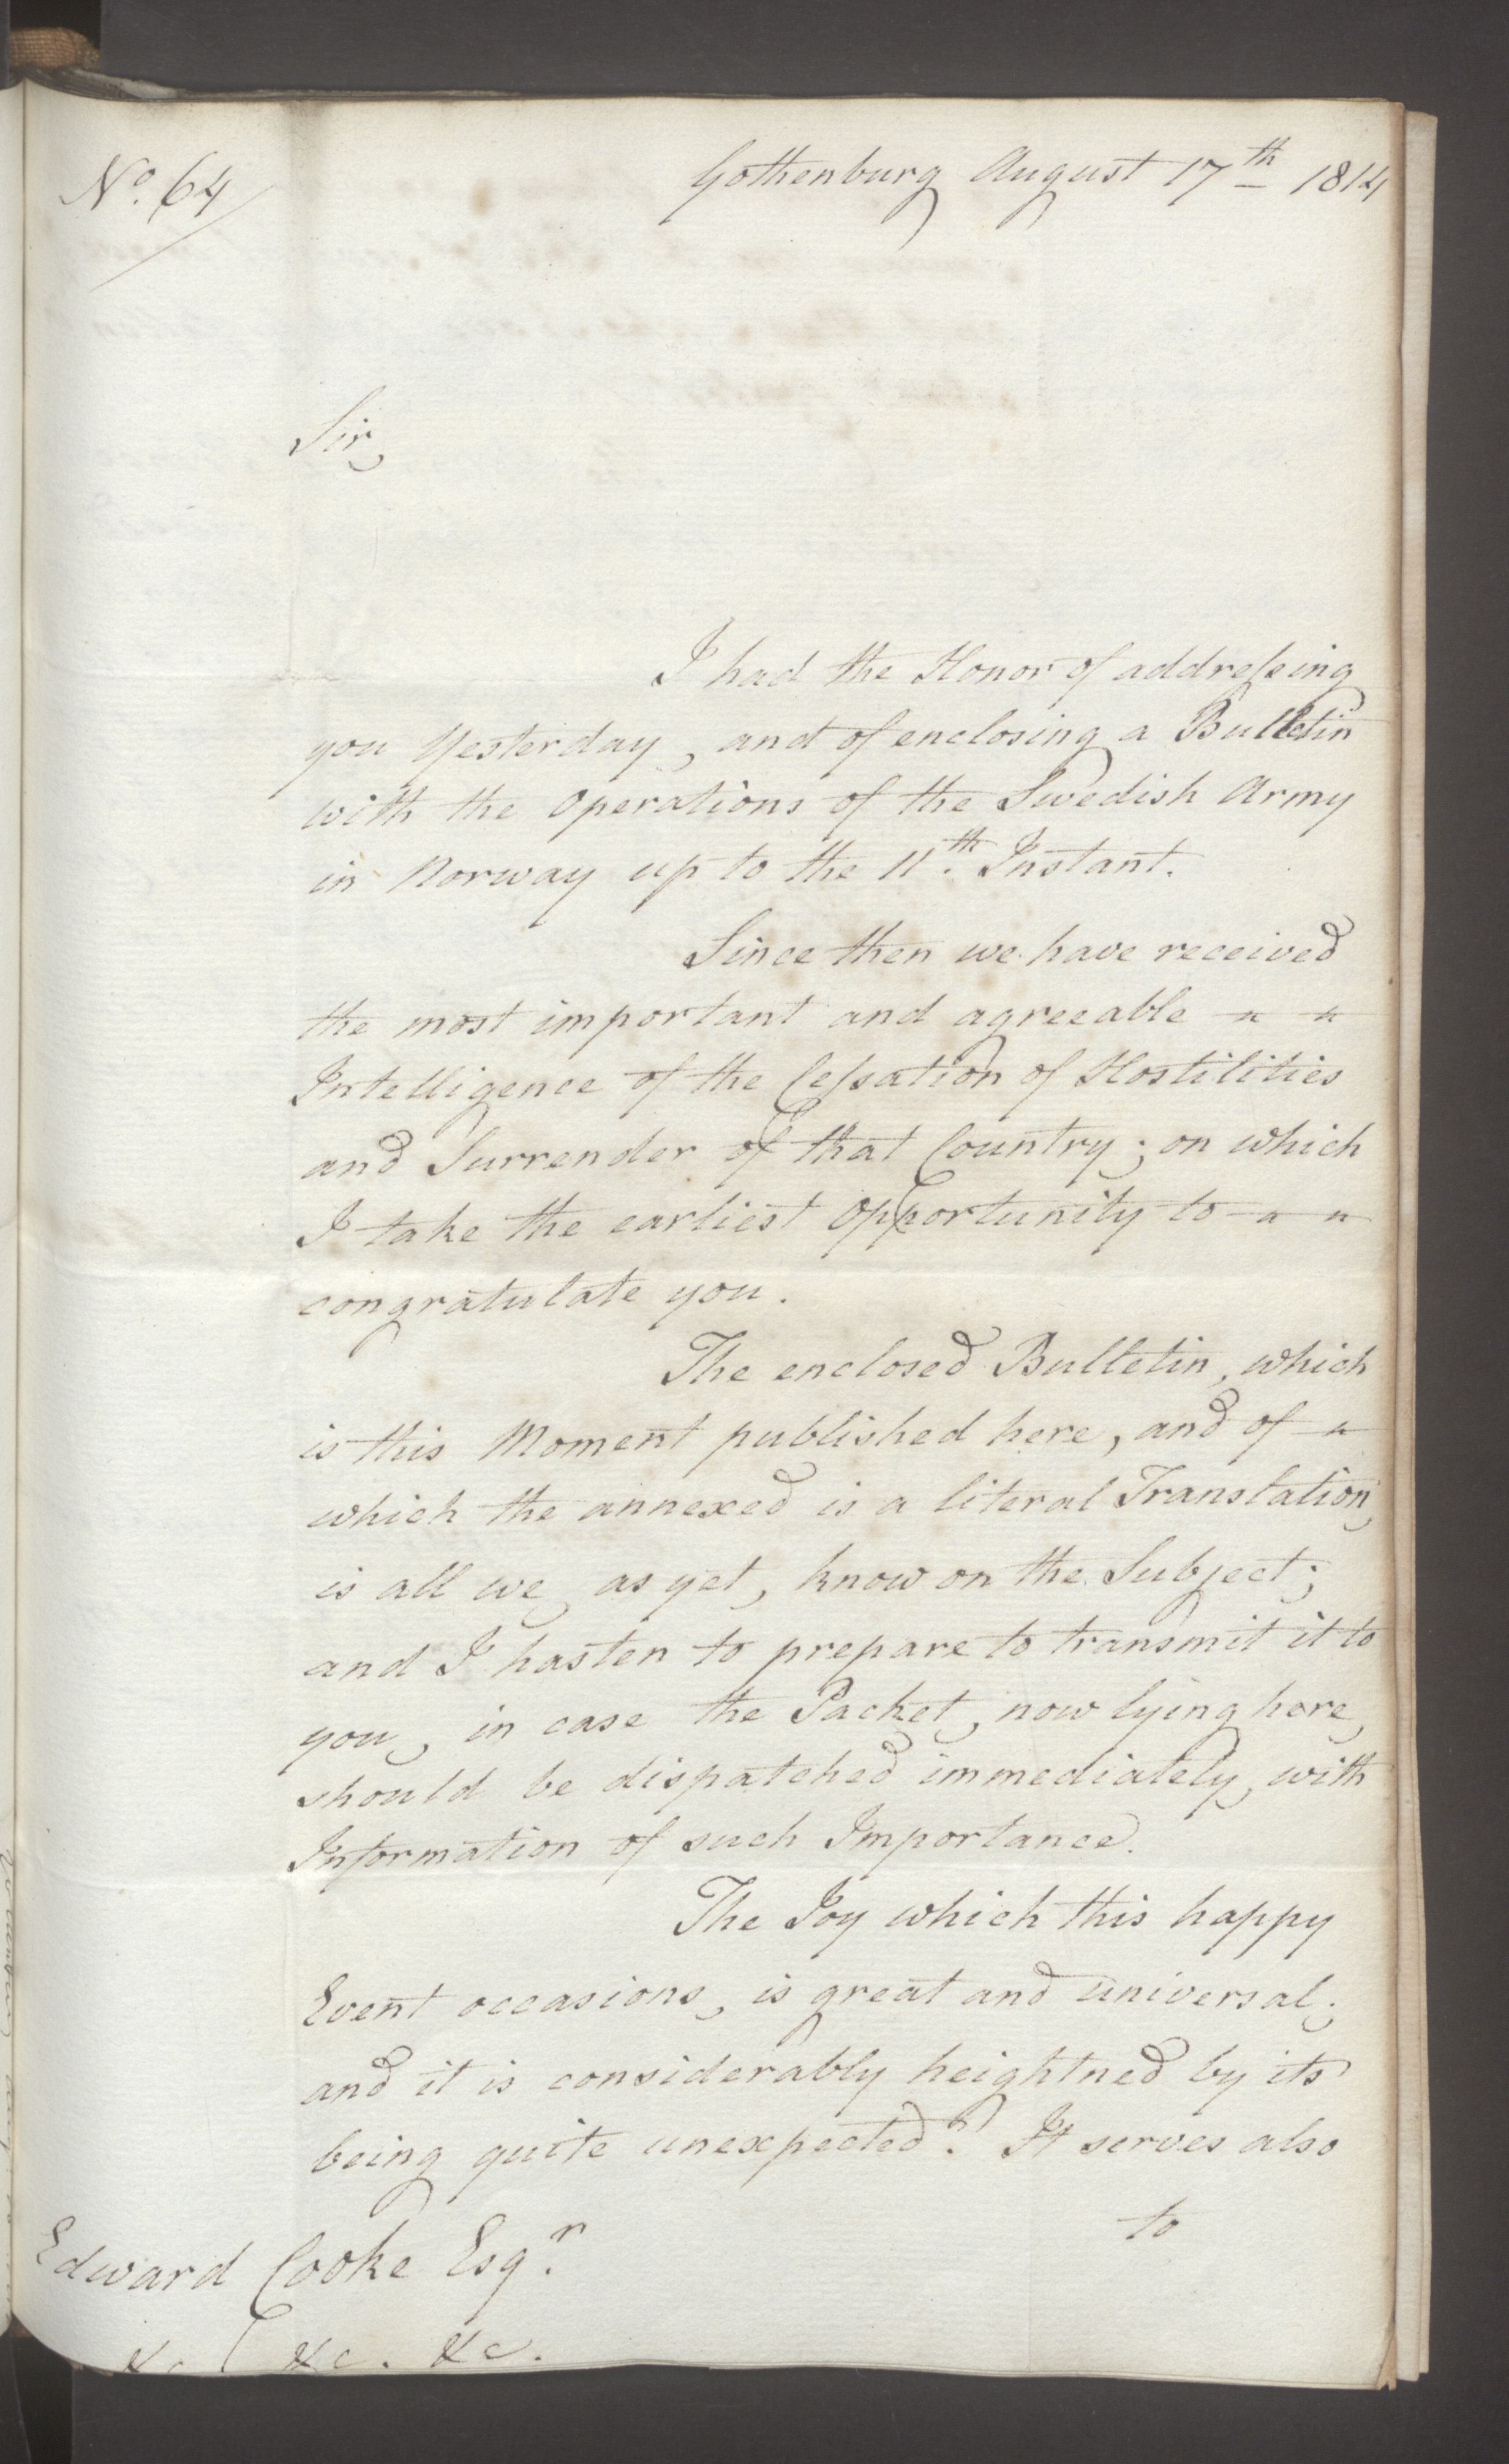 Foreign Office*, UKA/-/FO 38/16: Sir C. Gordon. Reports from Malmö, Jonkoping, and Helsingborg, 1814, p. 86